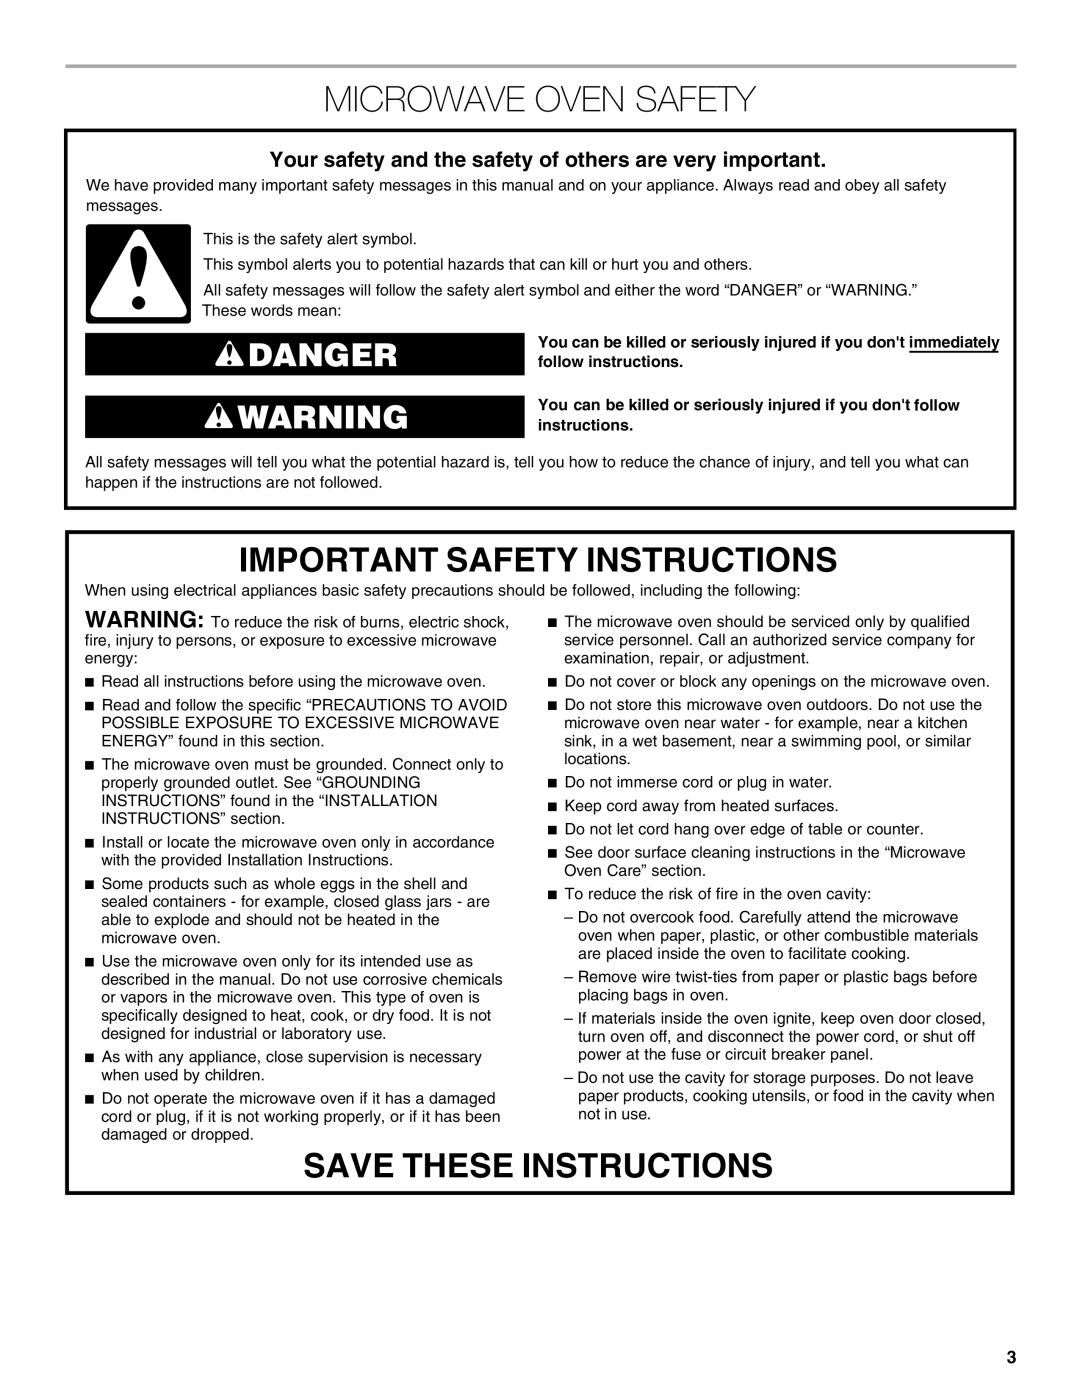 Jenn-Air W10491278A manual Microwave Oven Safety, Important Safety Instructions, Save These Instructions, Danger 